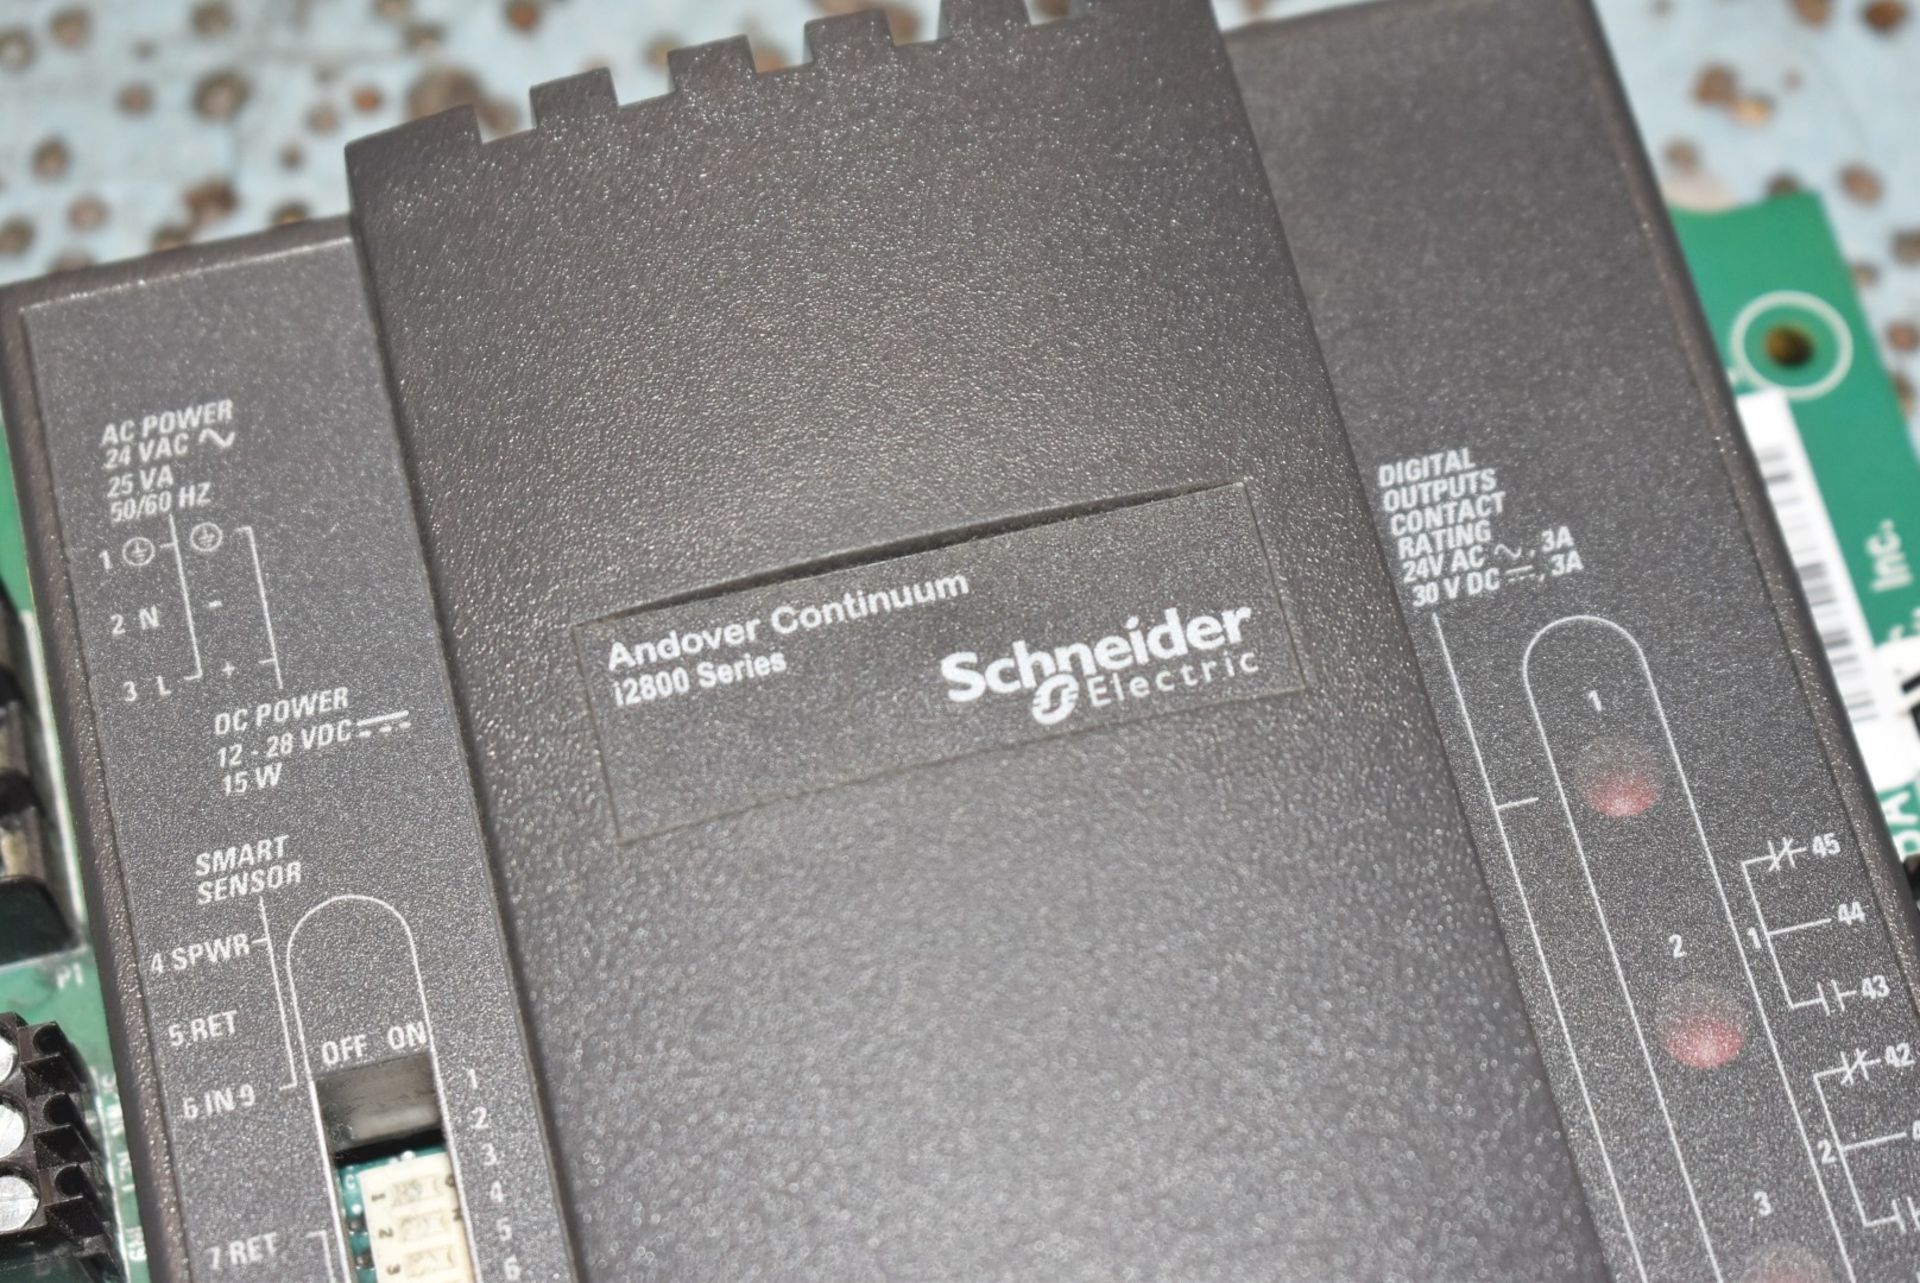 1 x Schneider Electric Andover Continuum i2800 Series Zone Controller - Unused Boxed Stock - Image 3 of 7